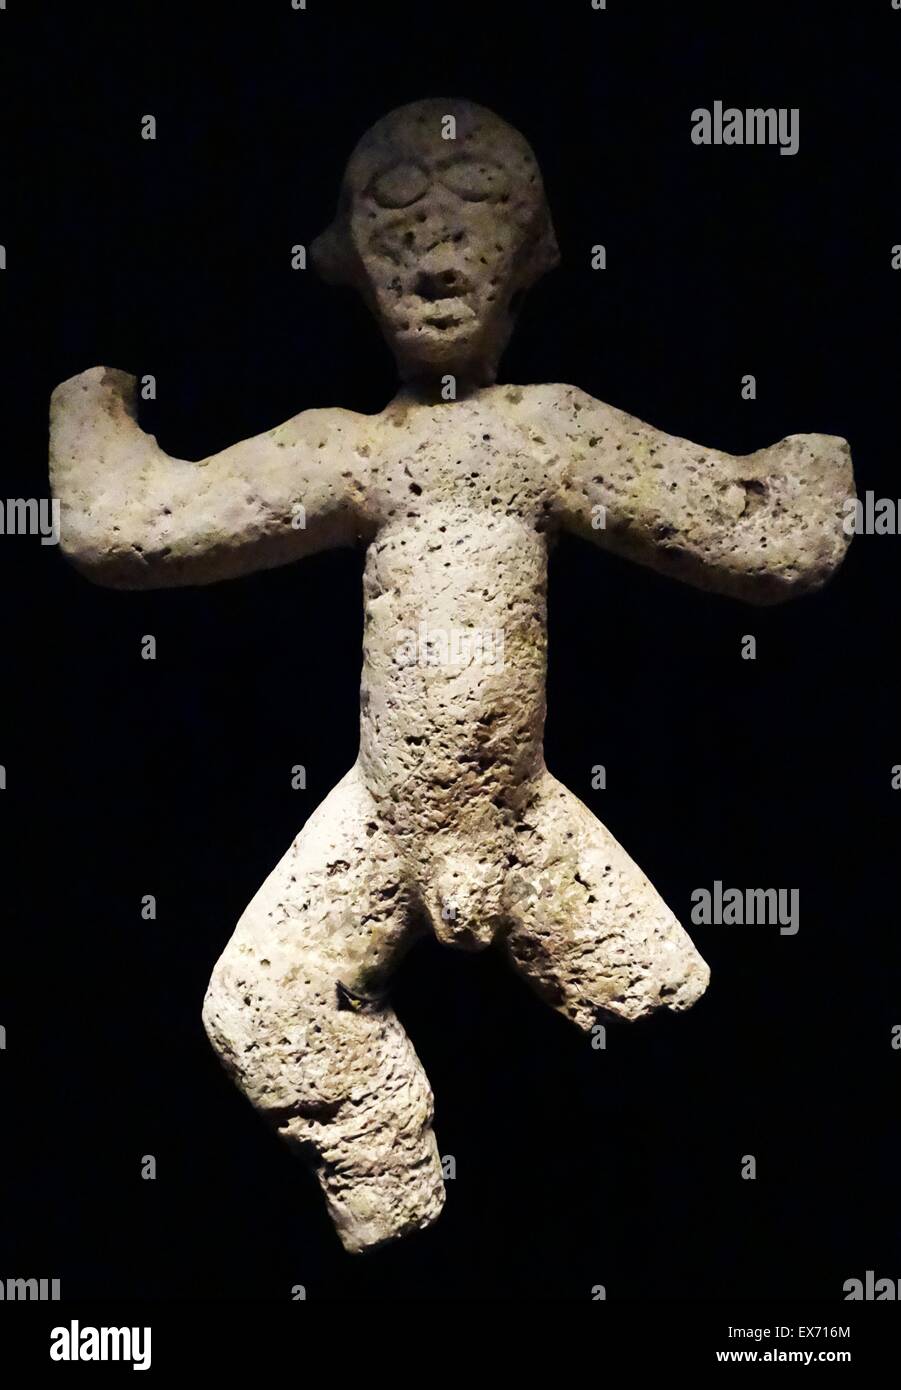 Spirit figure from the Tolai tribe, New Britain. The Tolai are the indigenous people of the Gazelle Peninsula and the Duke of York Islands of East New Britain in the New Guinea Islands region of Papua New Guinea. Stock Photo